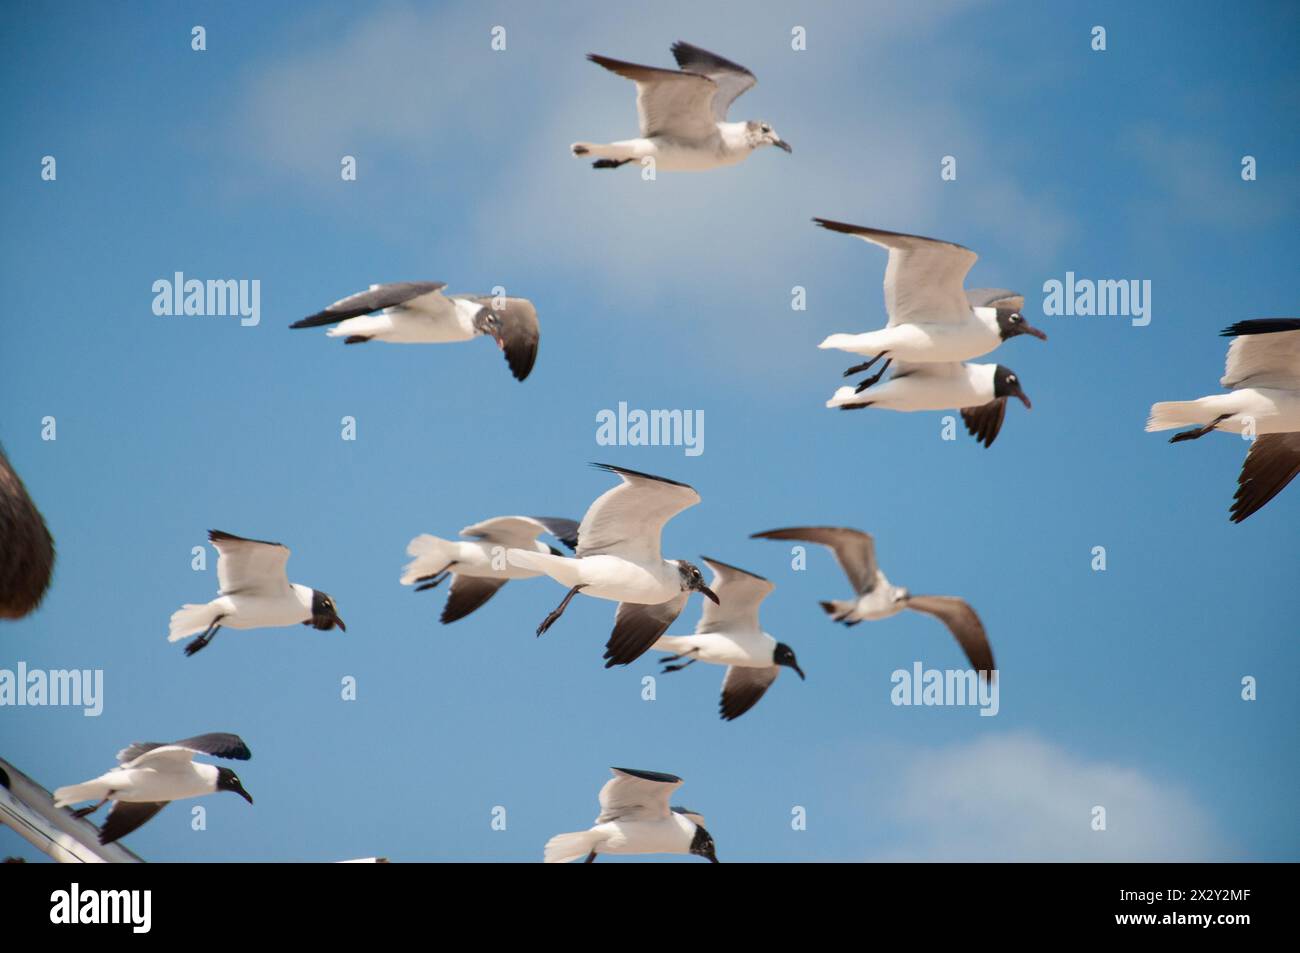 A group of seagulls flying at the beach Stock Photo